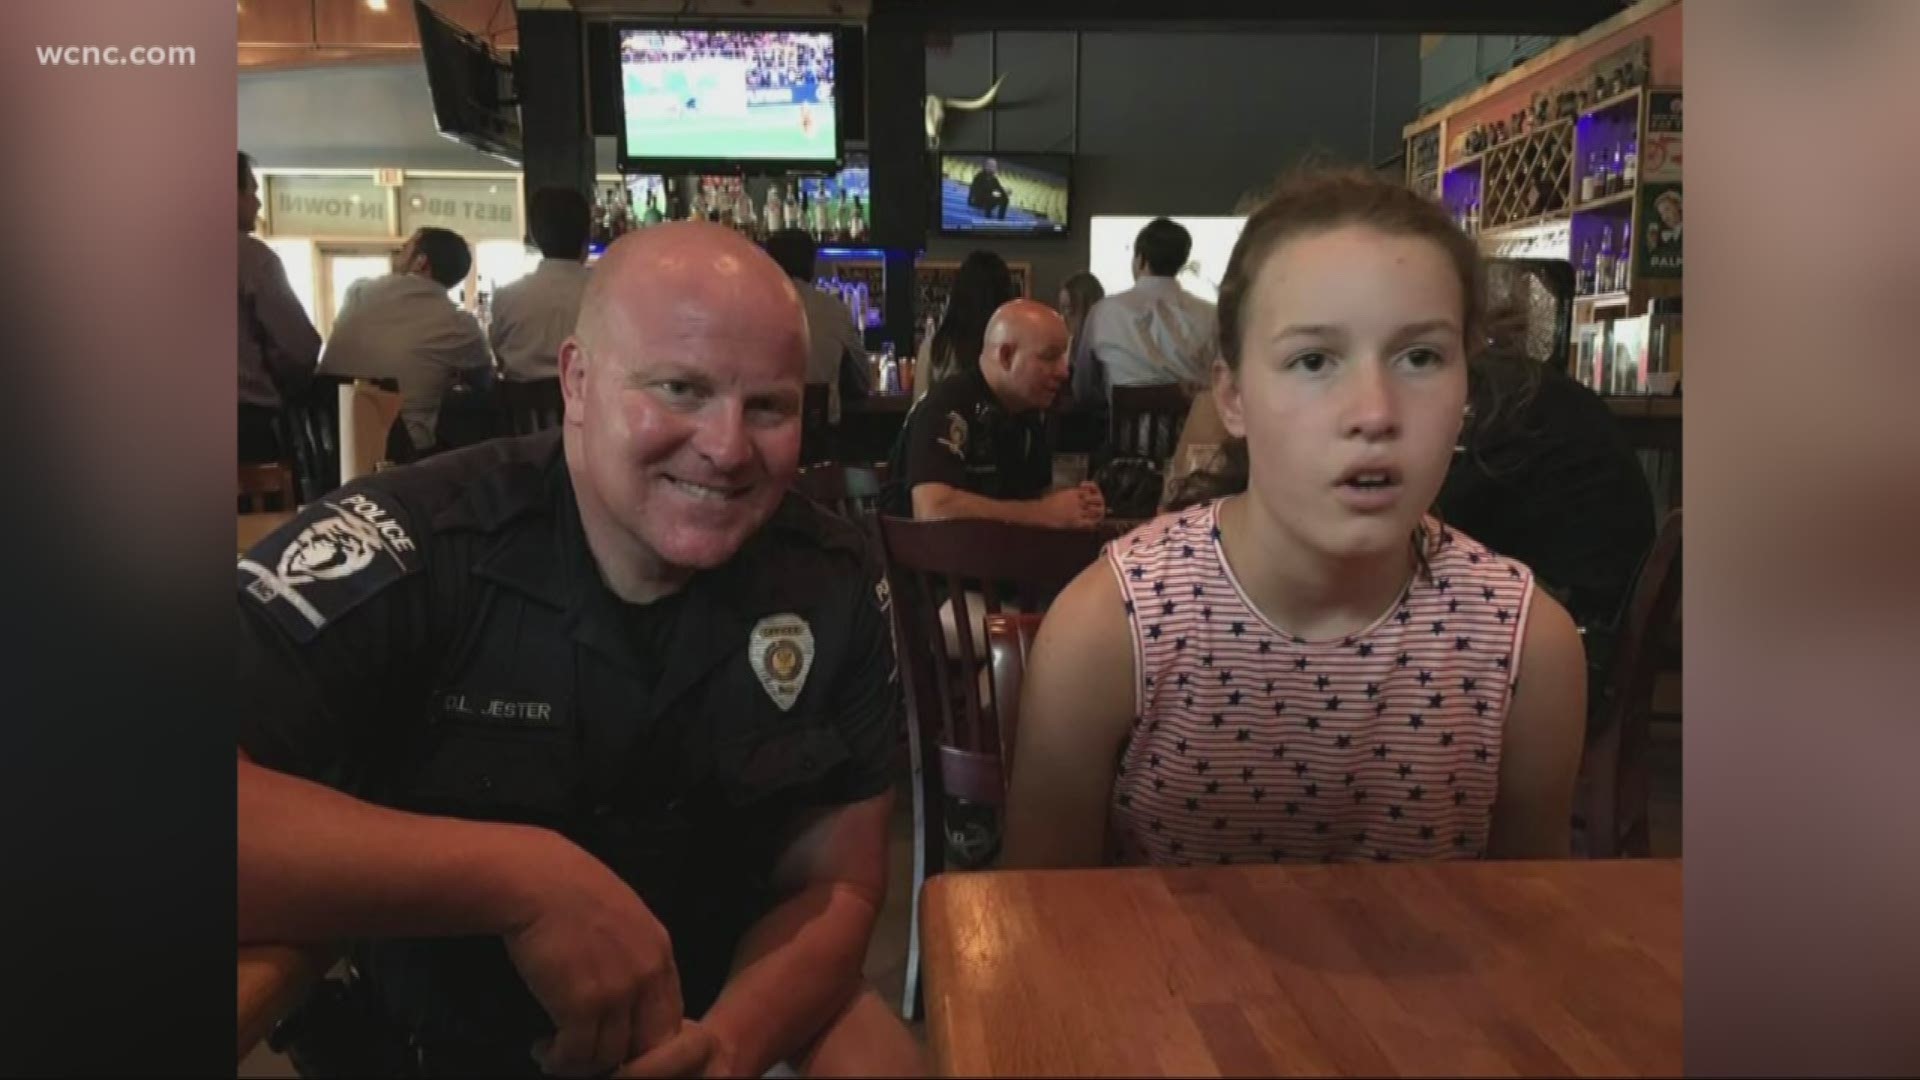 Mother 'moved to tears' after CMPD officer's interaction with daughter with Autism